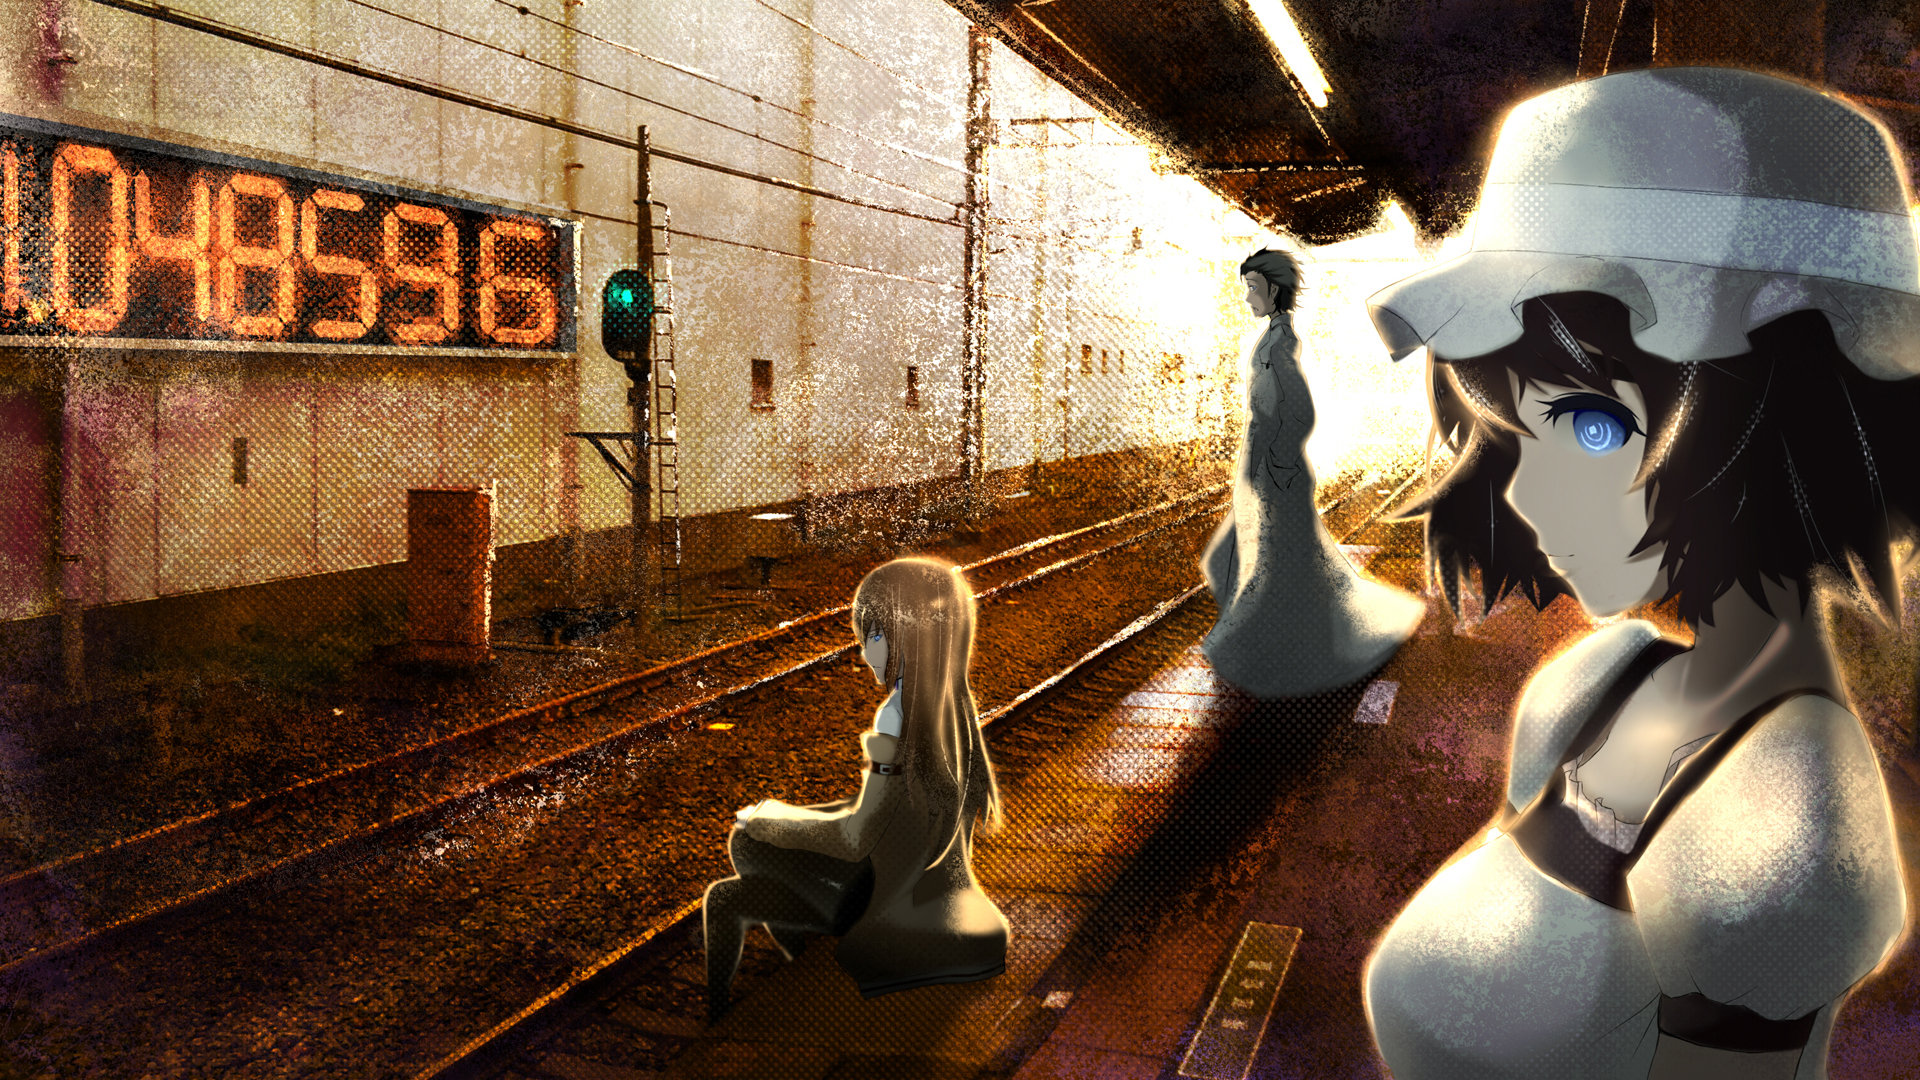 Download hd 1080p Steins Gate desktop background ID:315979 for free